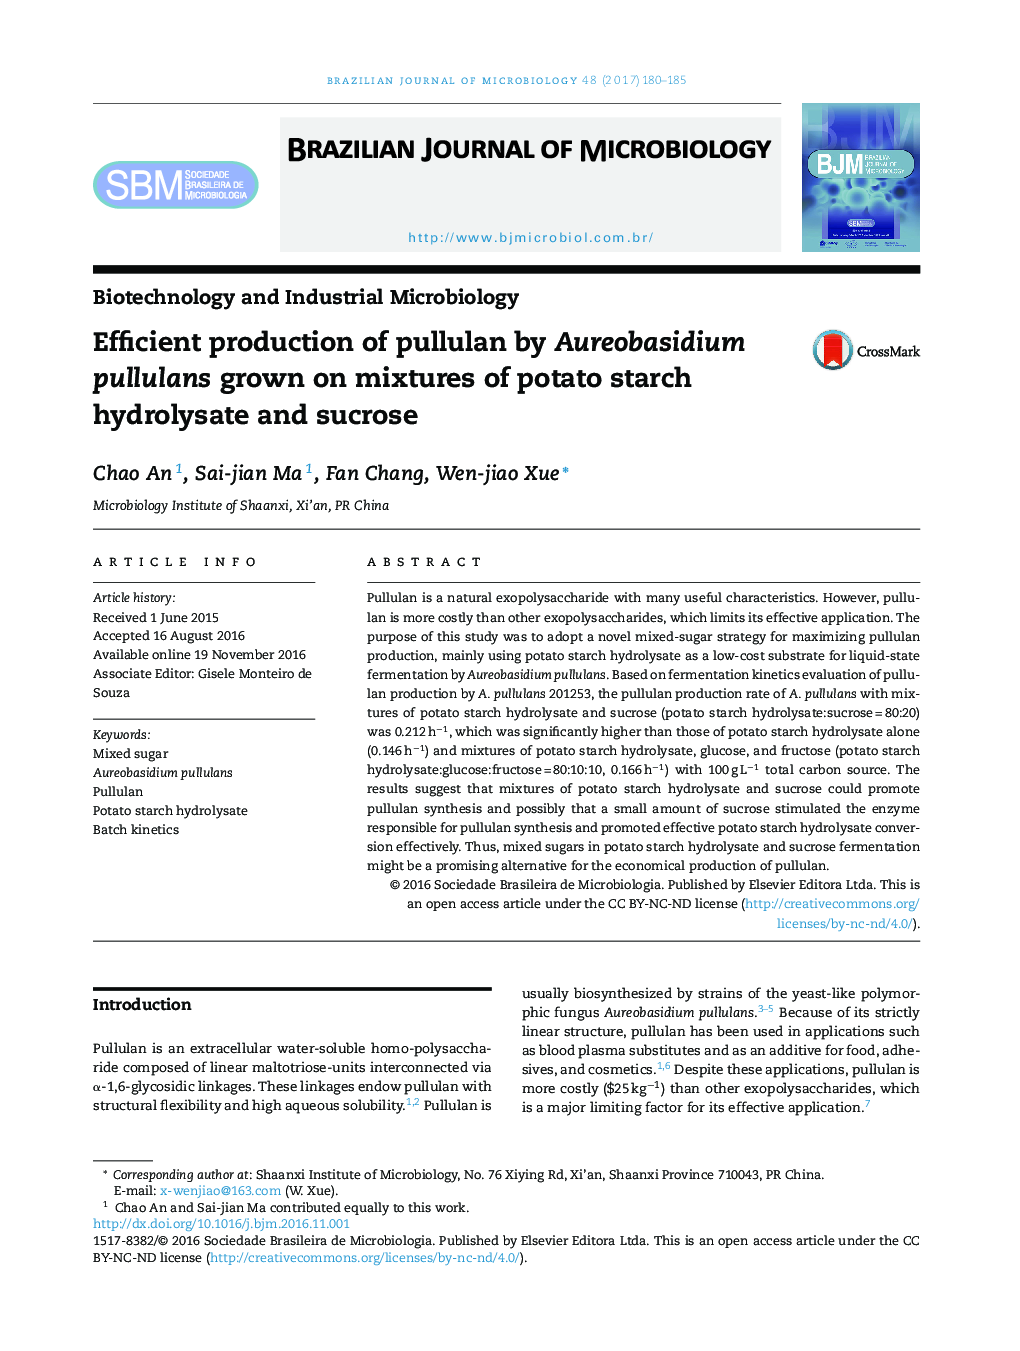 Efficient production of pullulan by Aureobasidium pullulans grown on mixtures of potato starch hydrolysate and sucrose